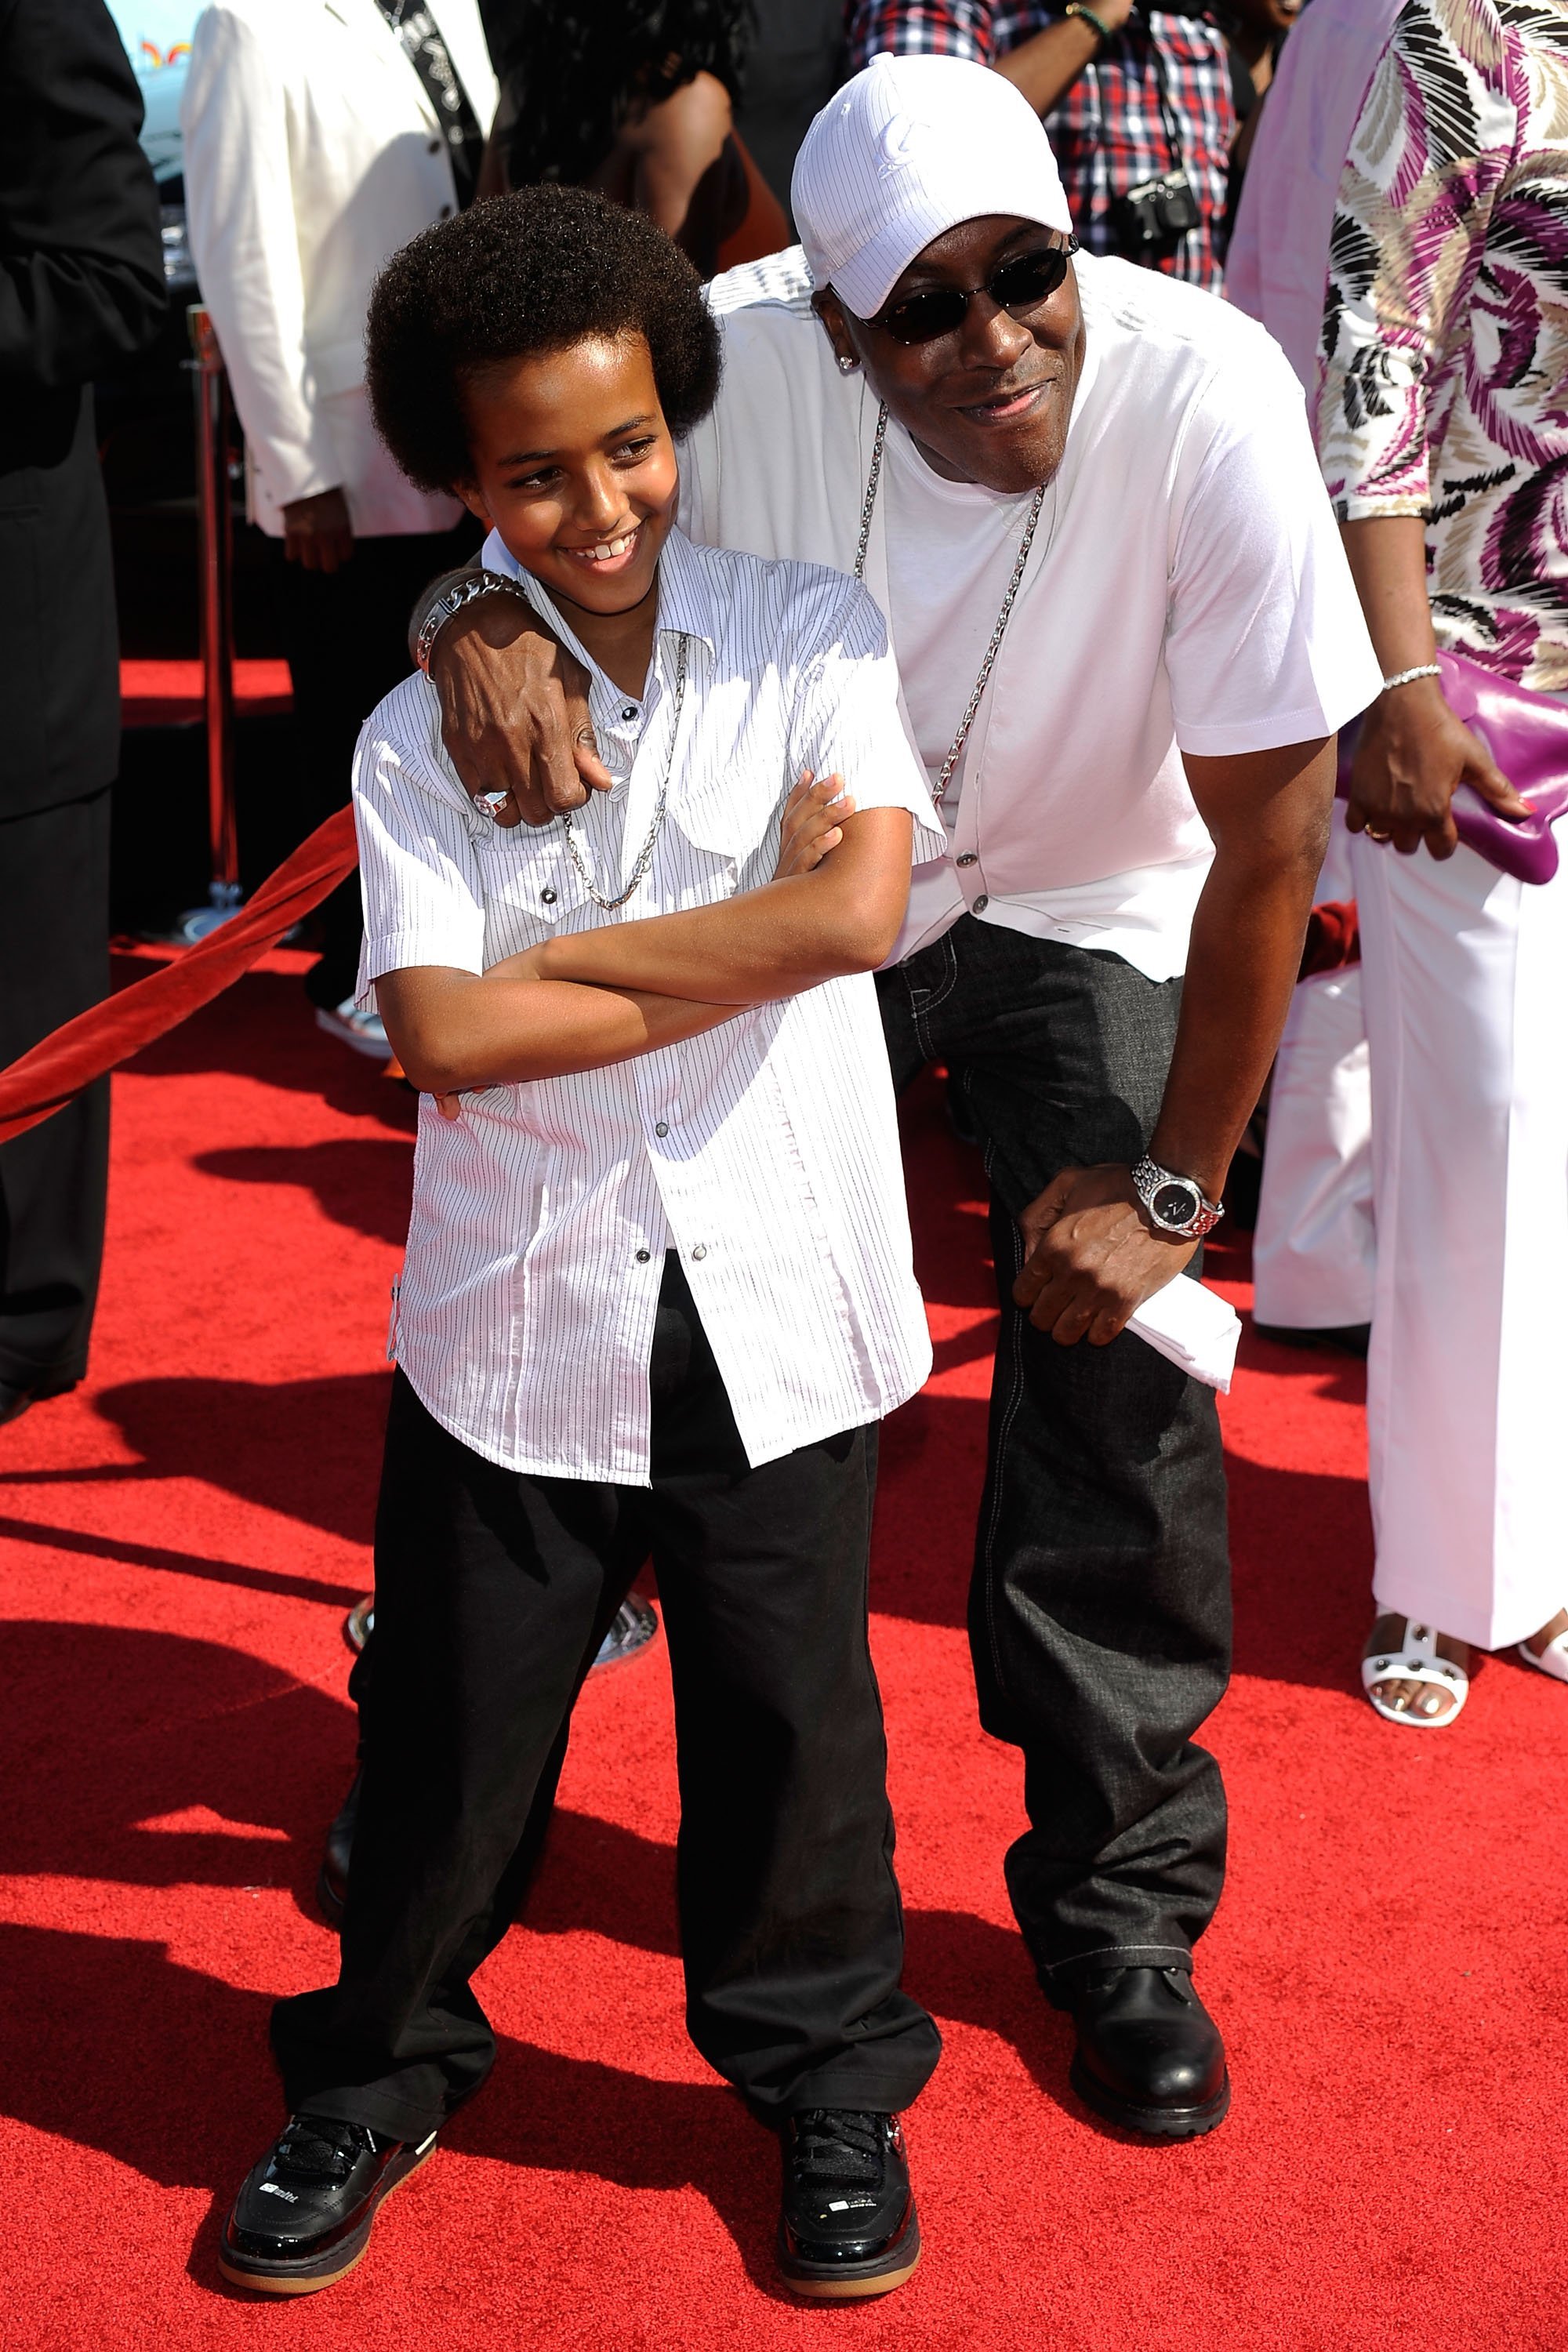 Arsenio Hall and son Arsenio Hall Jr. arrive at the 2009 BET Awards held at the Shrine Auditorium on June 28, 2009 | Photo: GettyImages